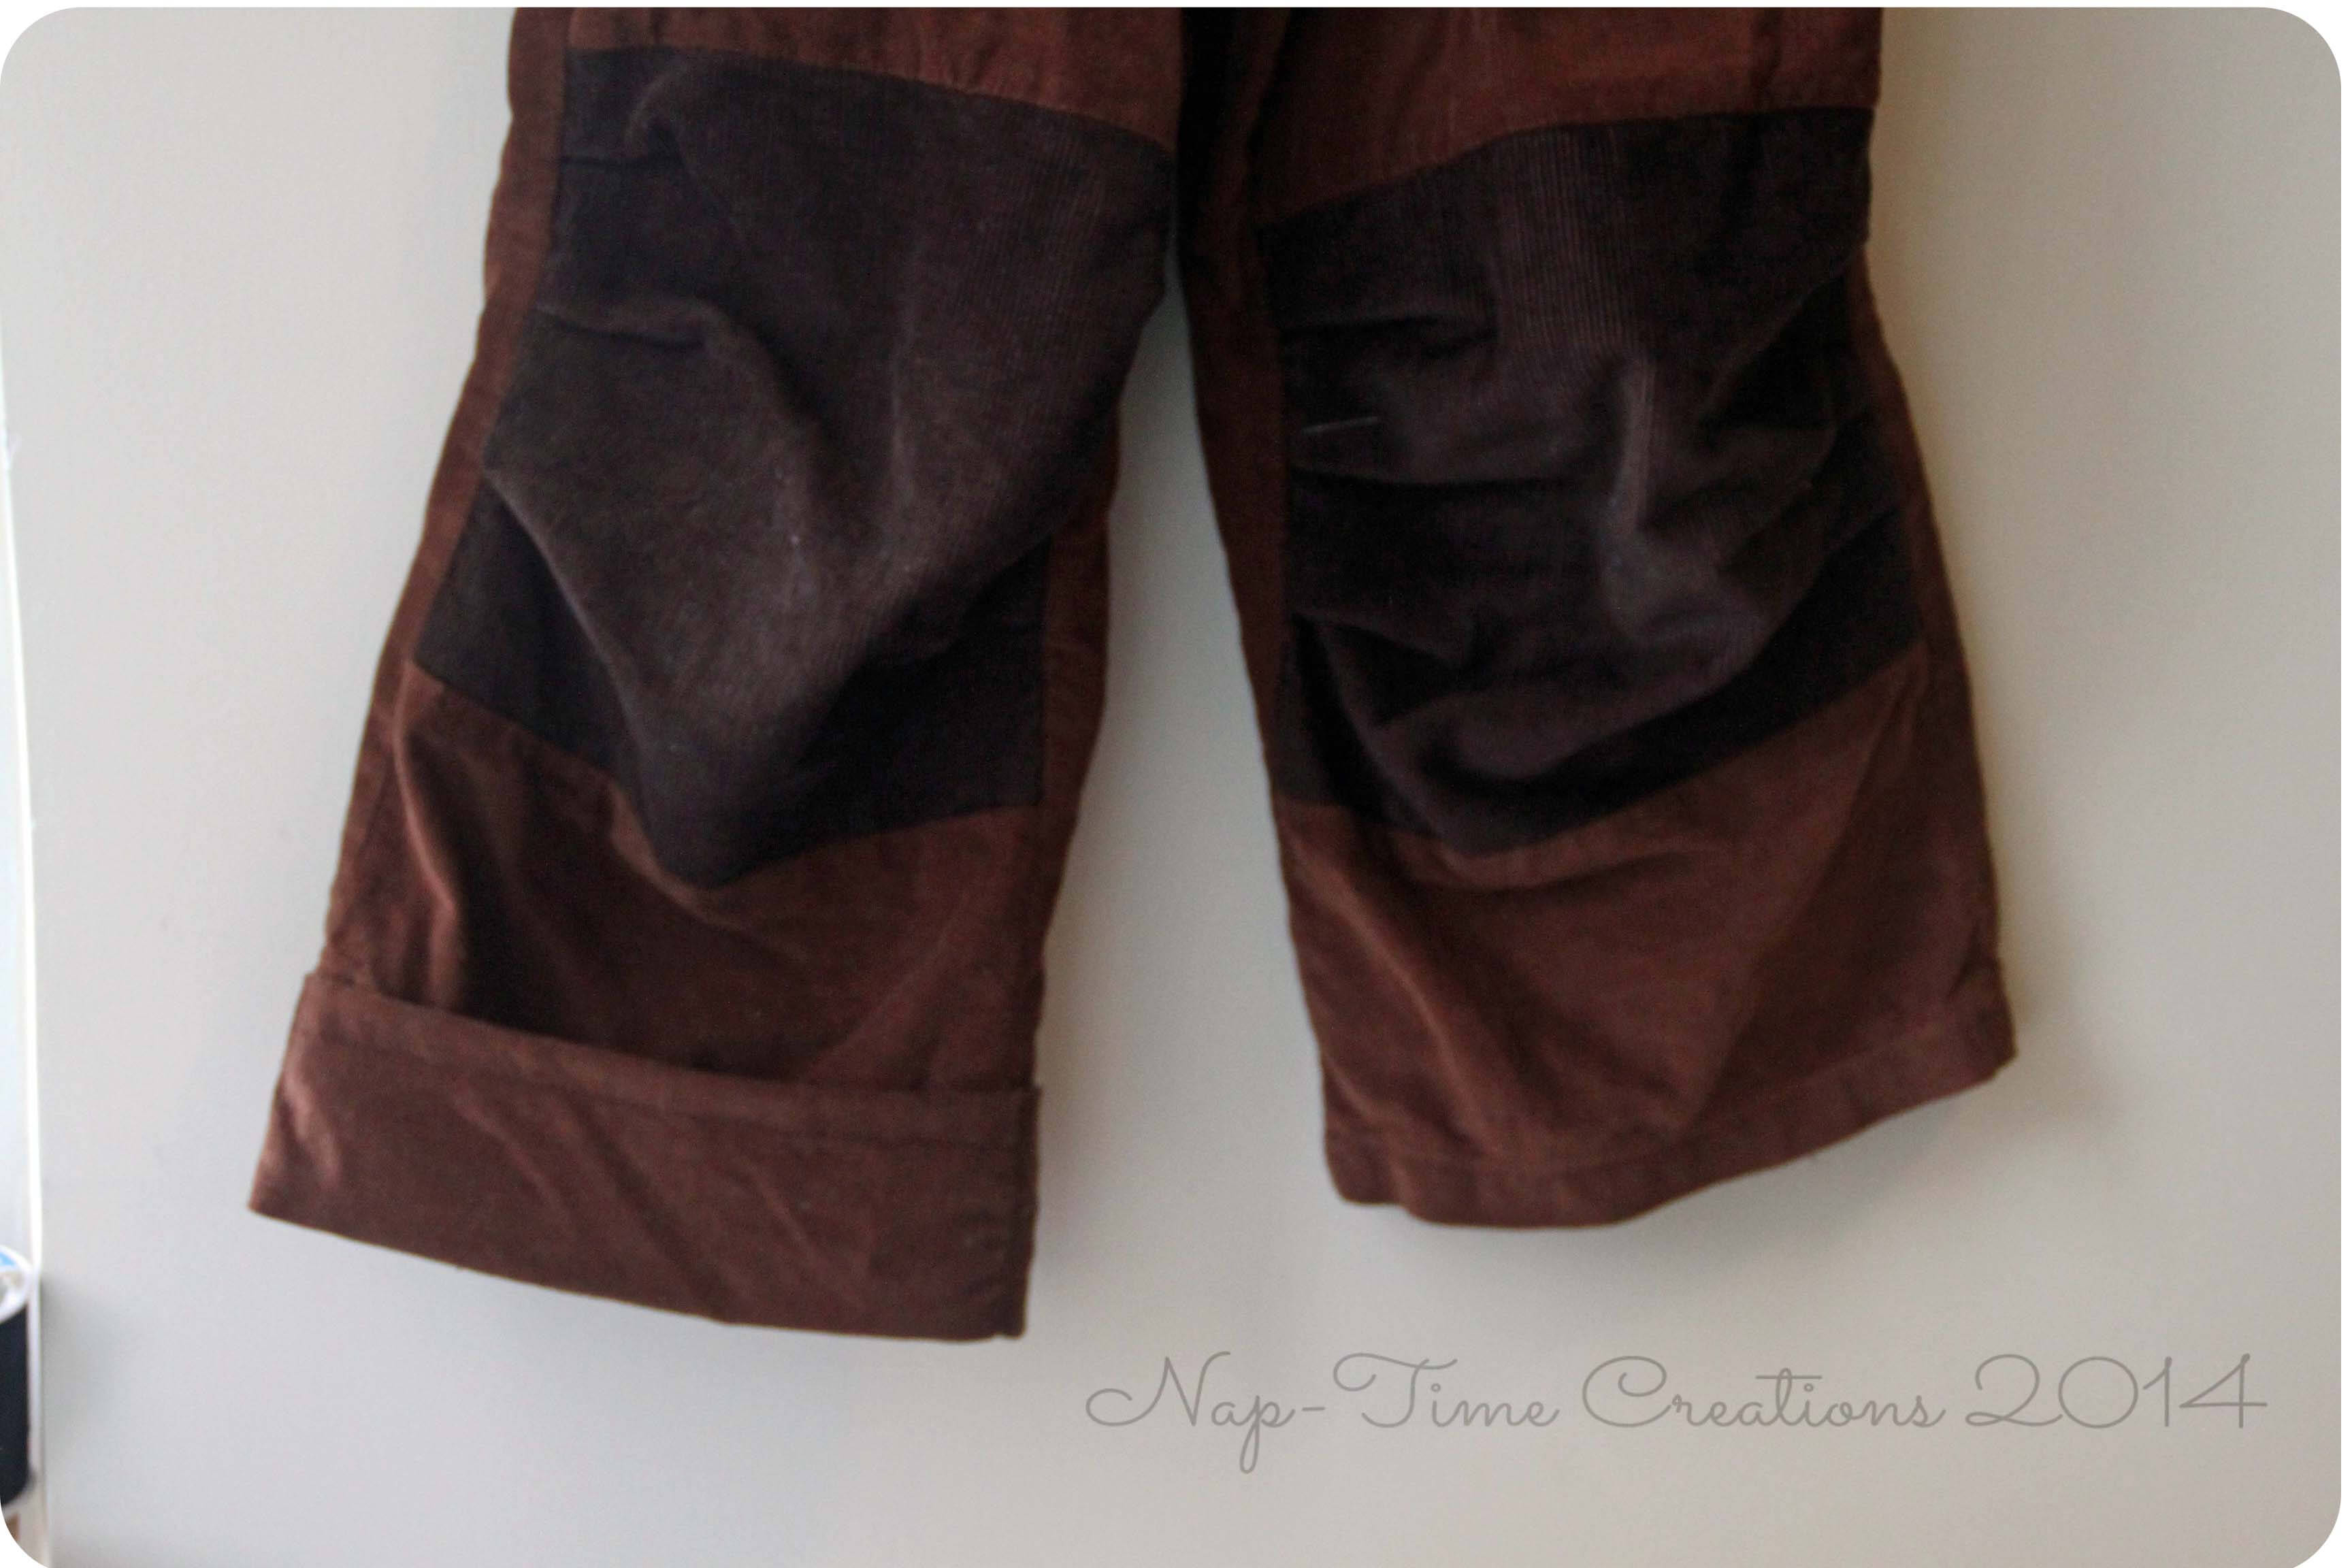 adding a cuff to lengthen pants